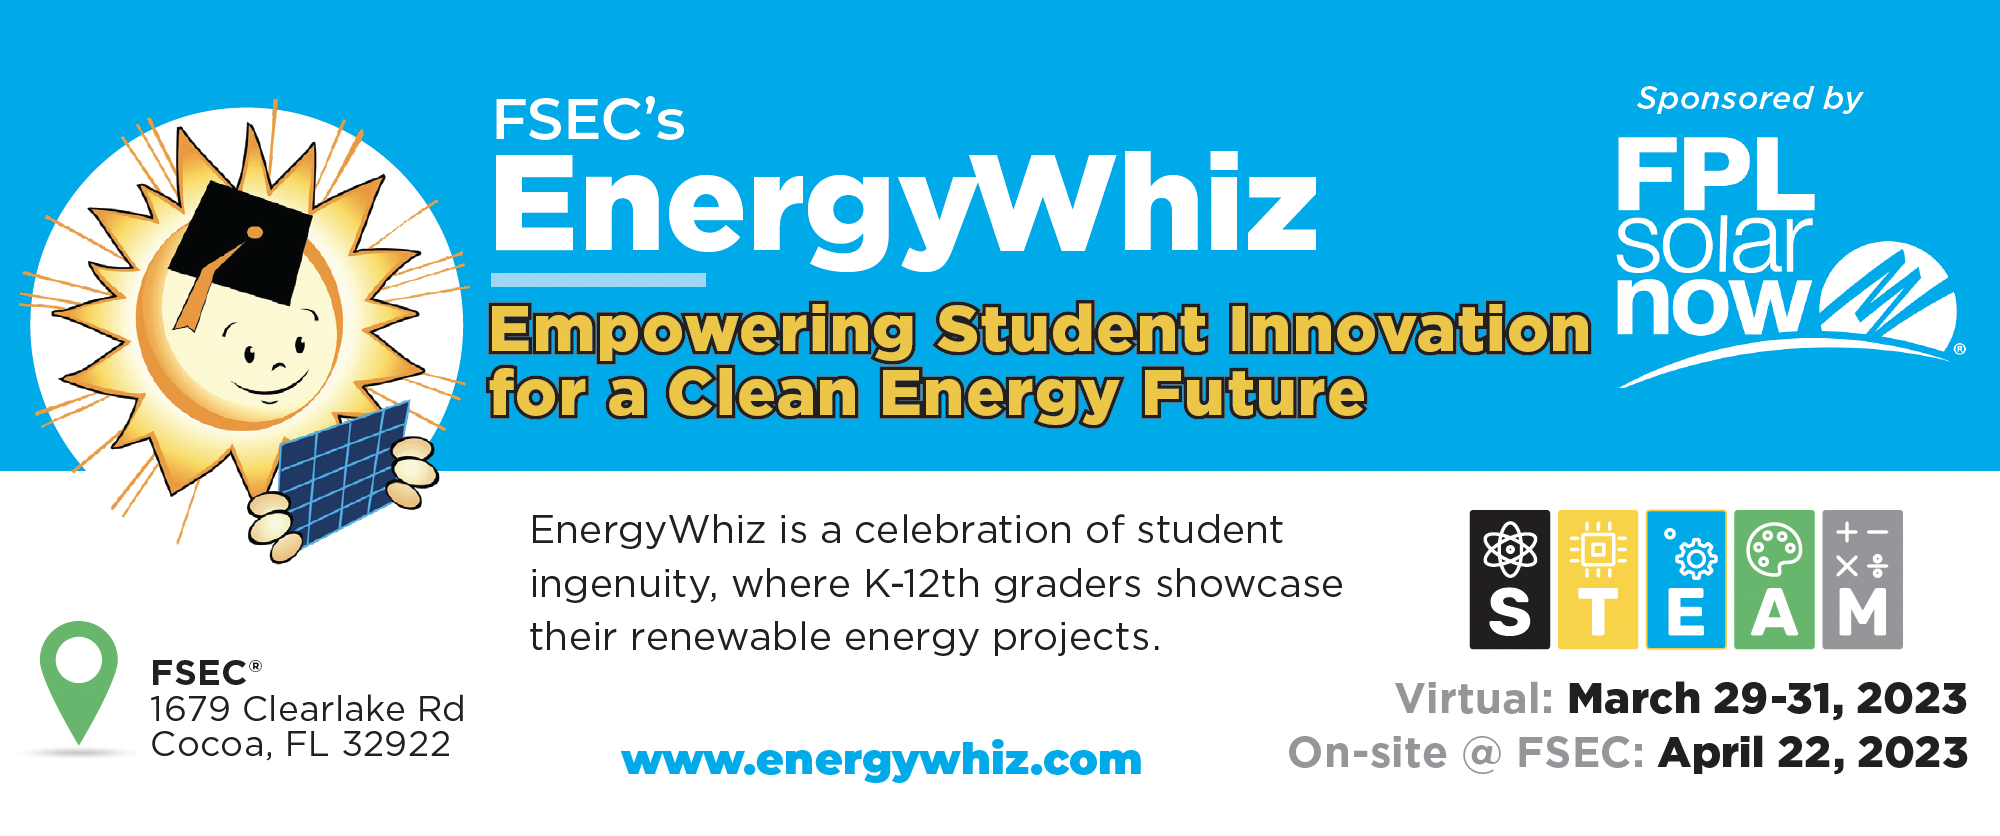 EnergyWhiz Virtual March 29-31, 2023, On-site at FSEC April 22, 2023